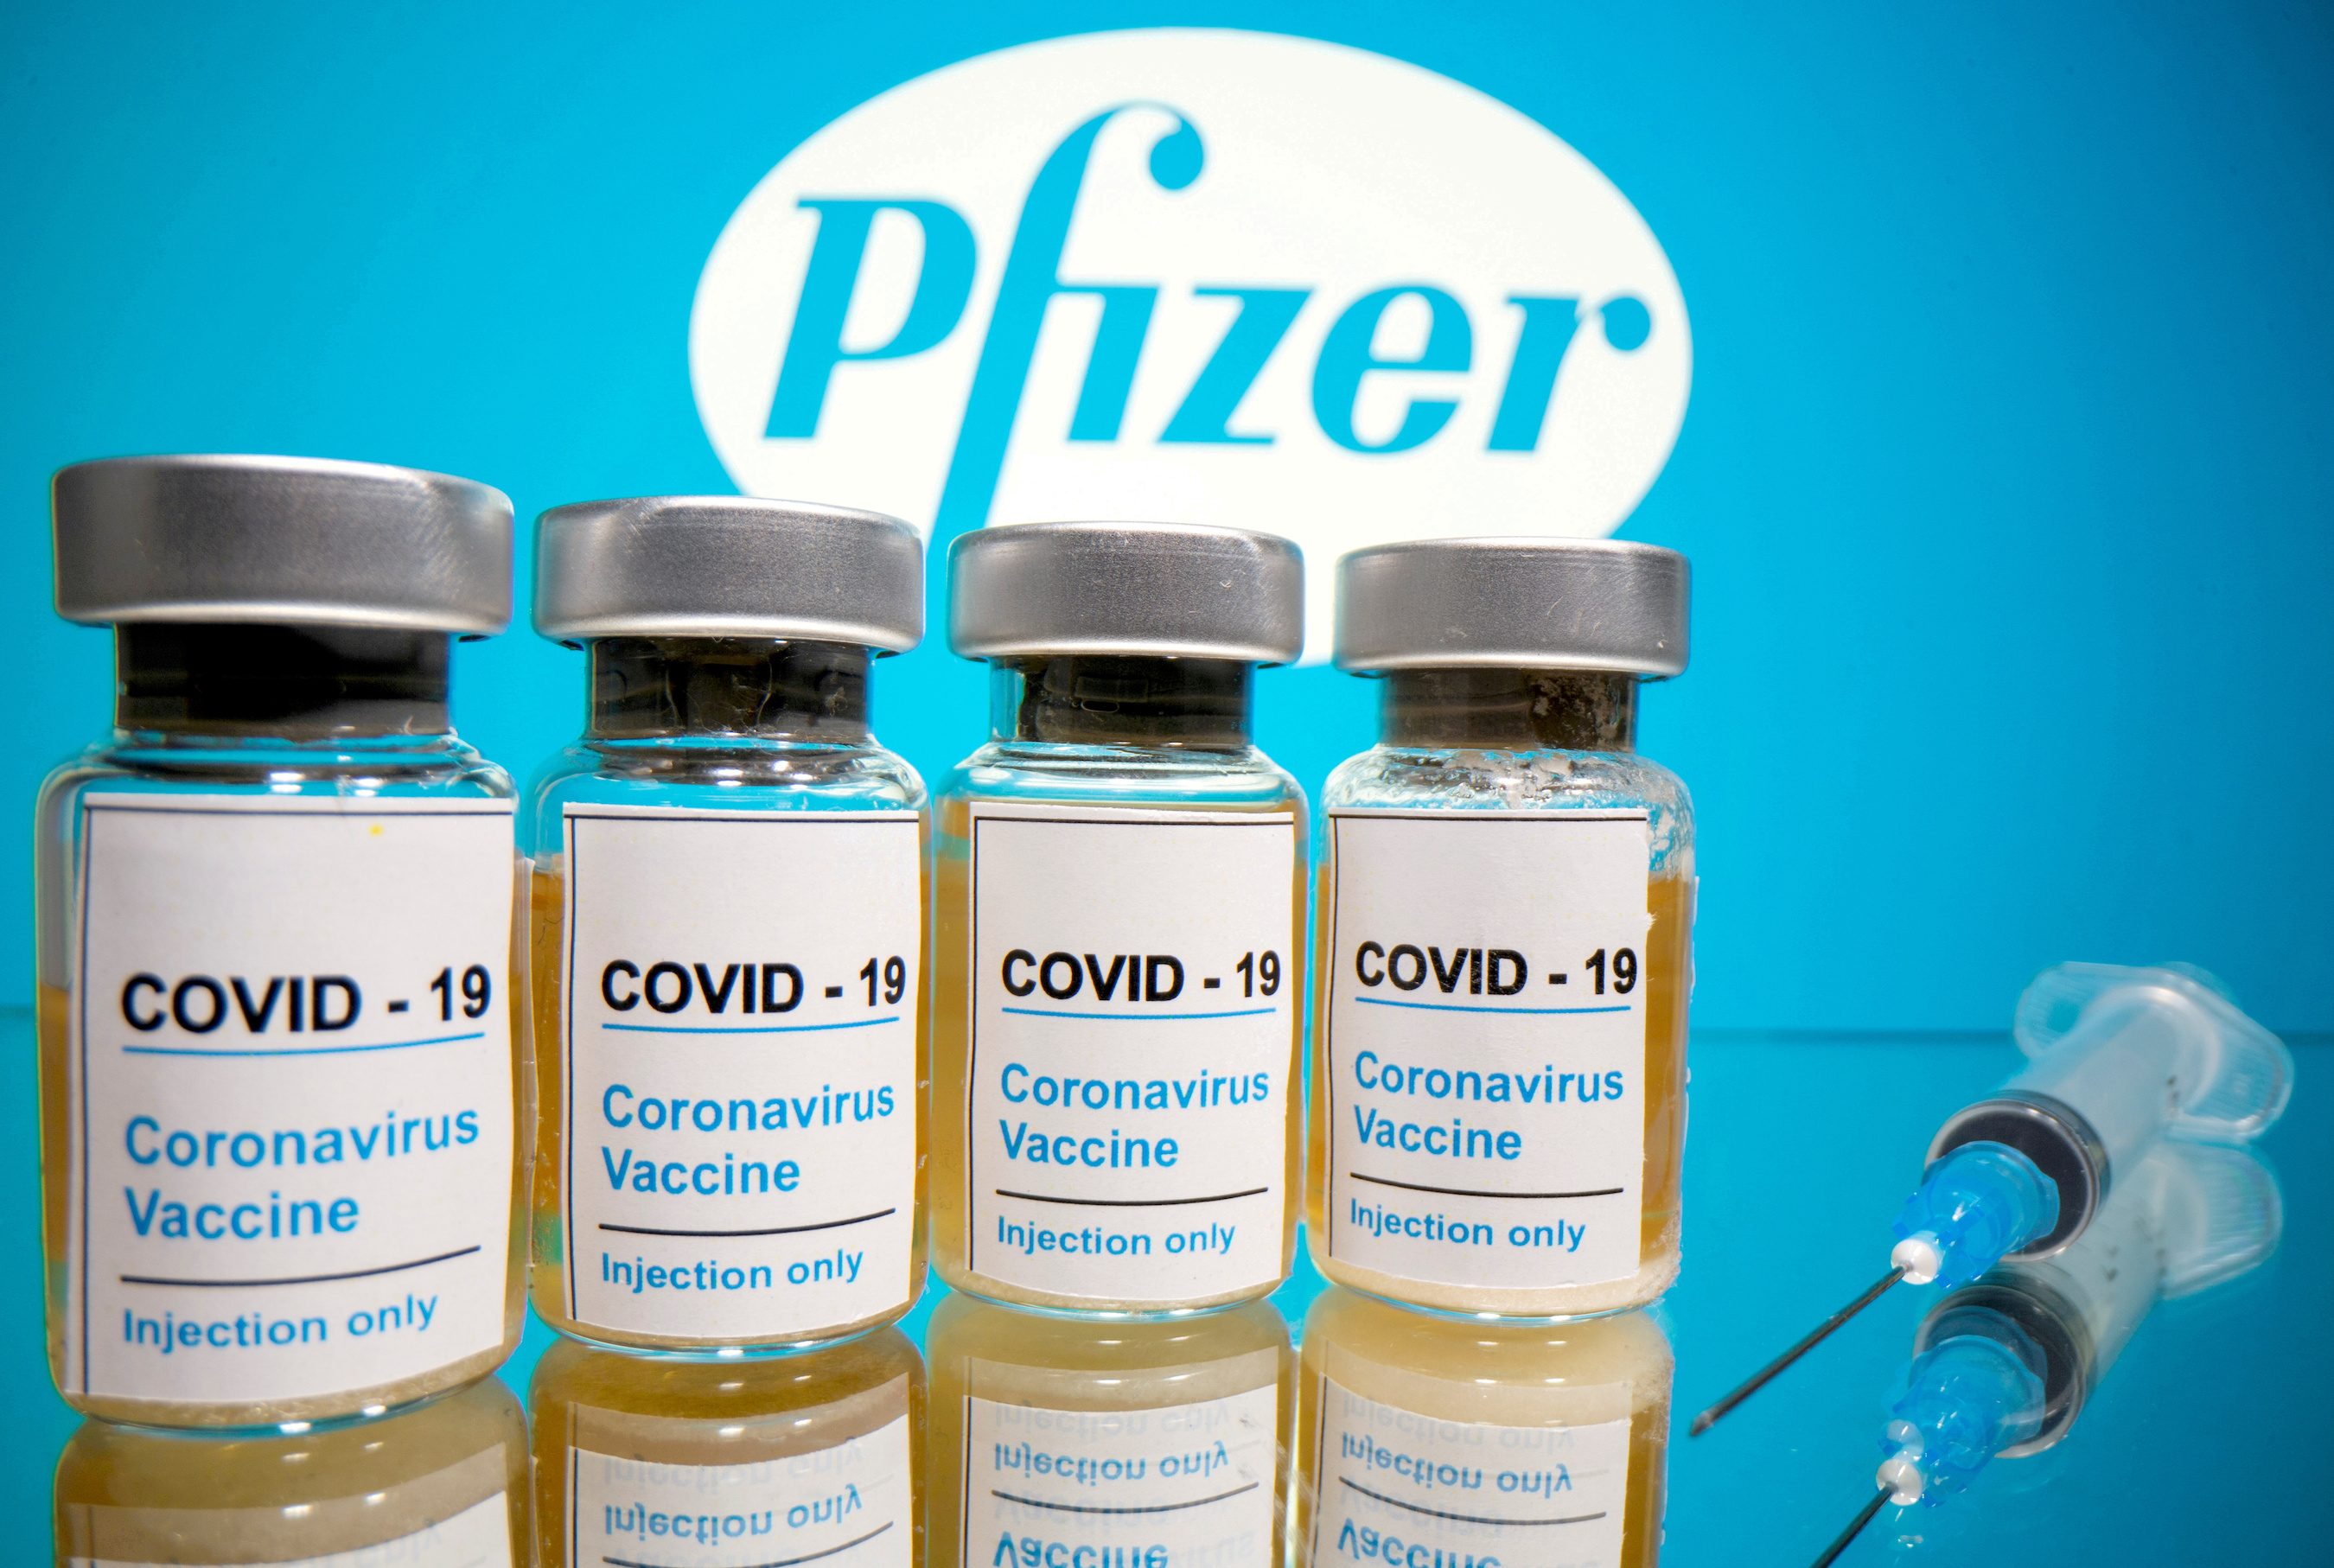 Pfizer sees about $15 billion in 2021 sales from COVID-19 vaccine